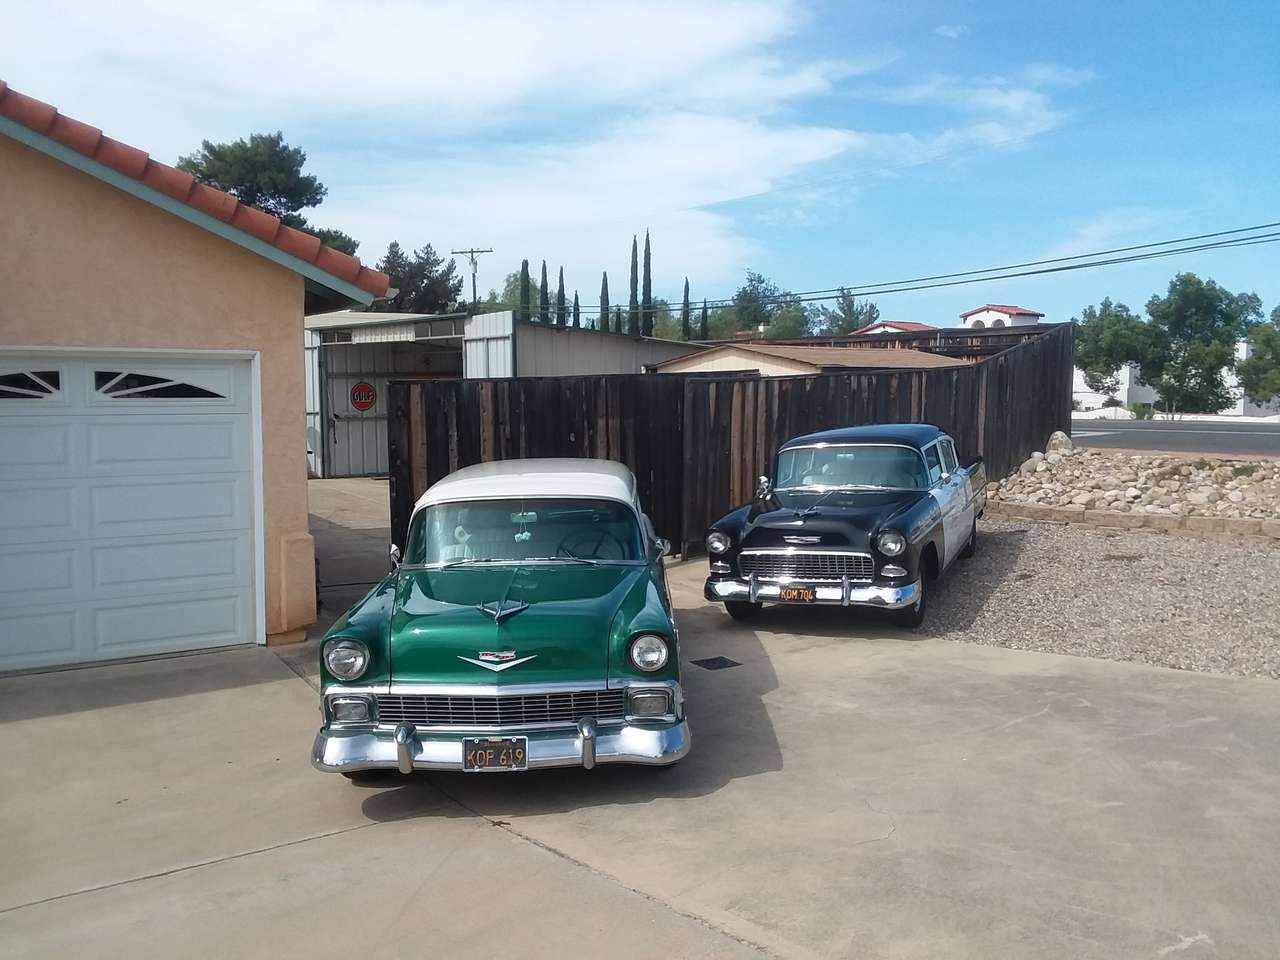 55 chevy polisbil & 56 chevy vagn Pussel online